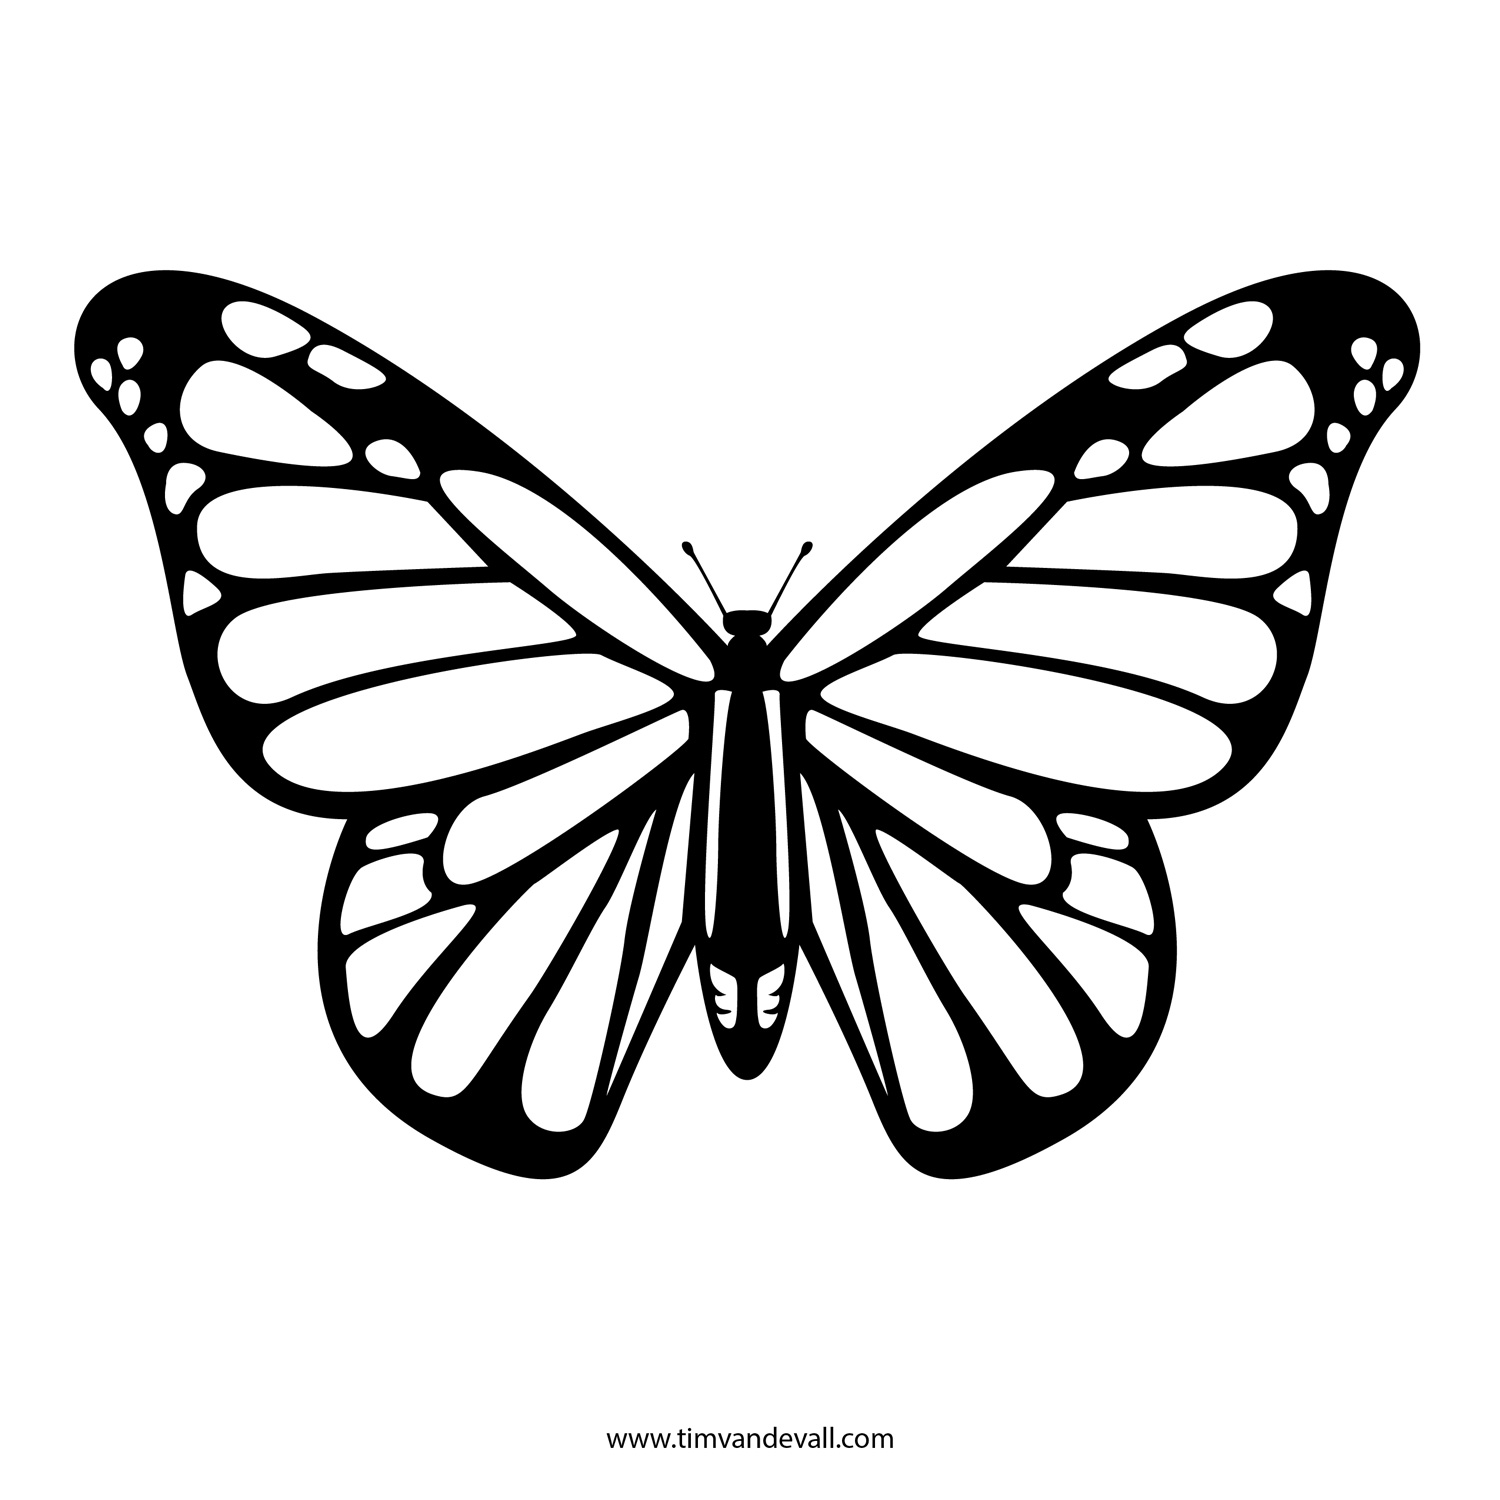 these-free-printable-picture-of-a-butterfly-mackira-thanatos